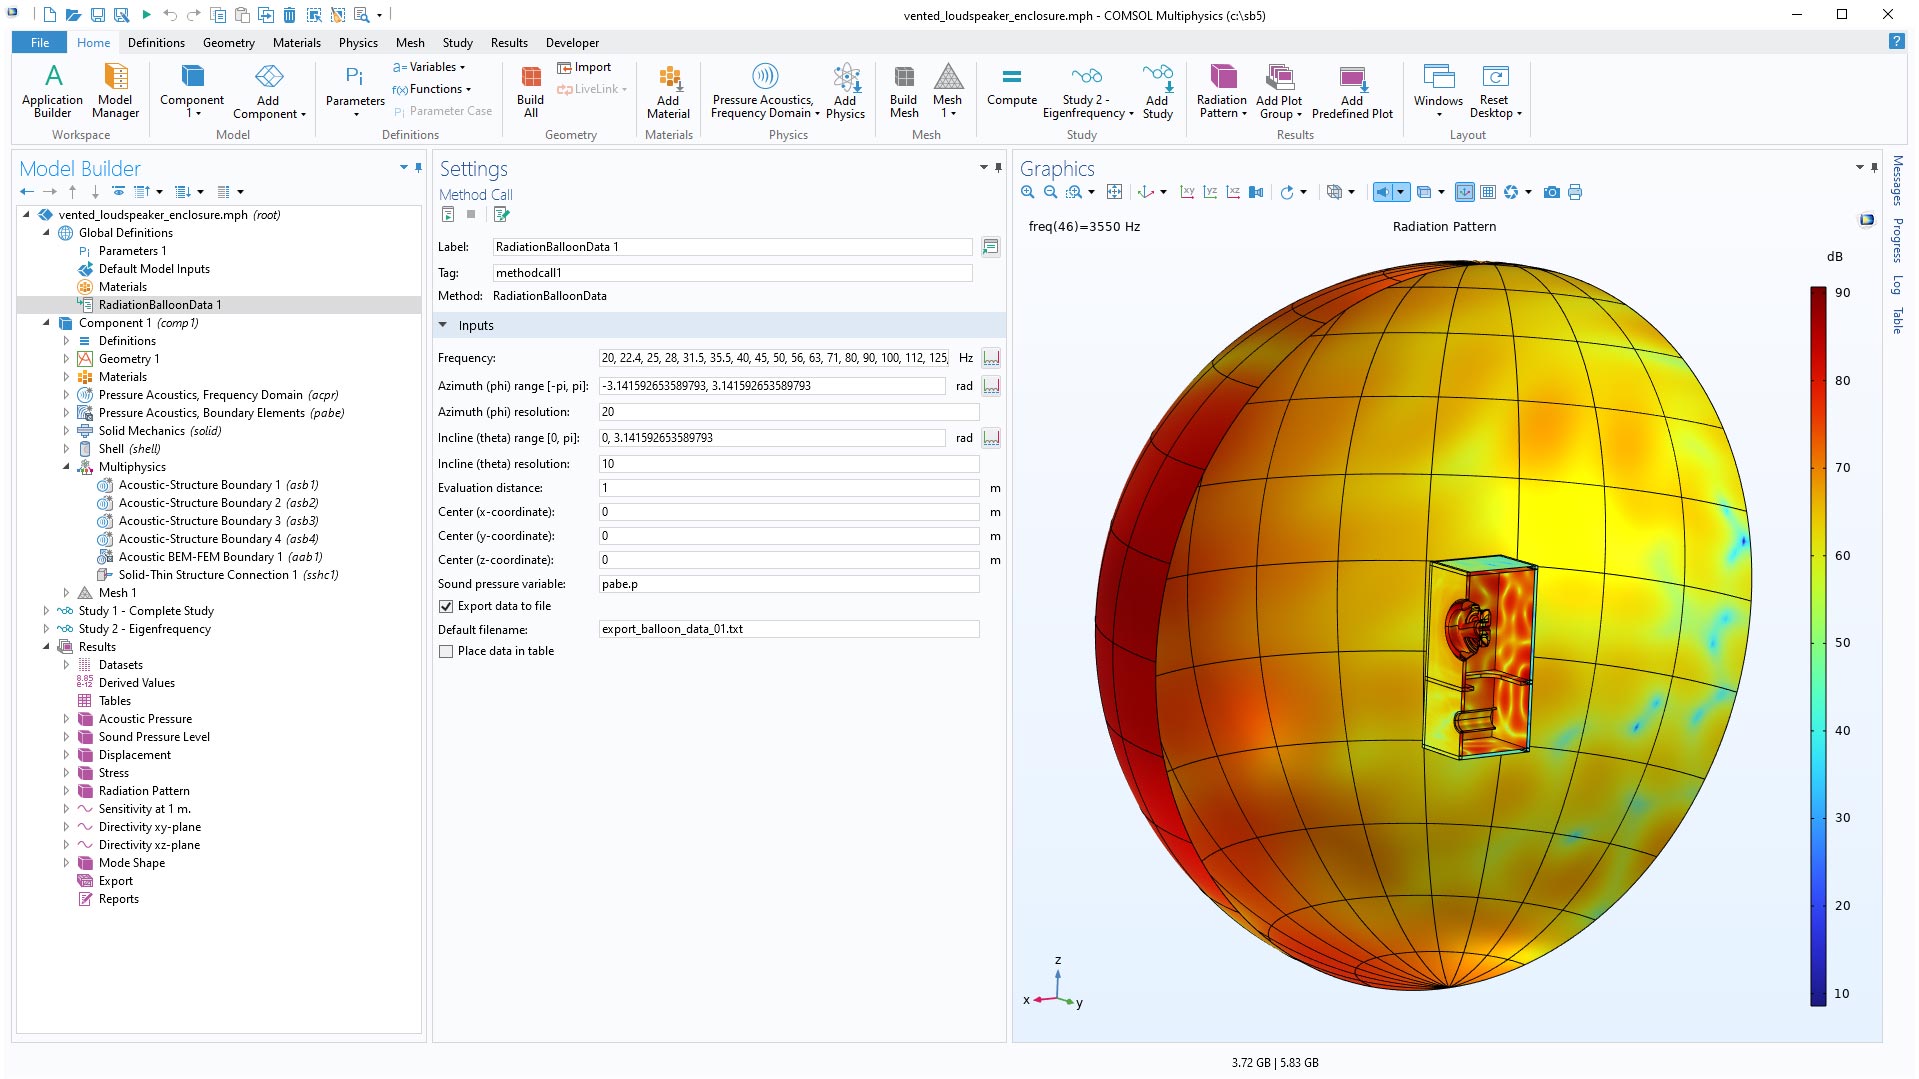 The COMSOL Multiphysics UI showing the Model Builder with the Method Call node highlighted, the corresponding Settings window, and a loudspeaker model in the Graphics window.